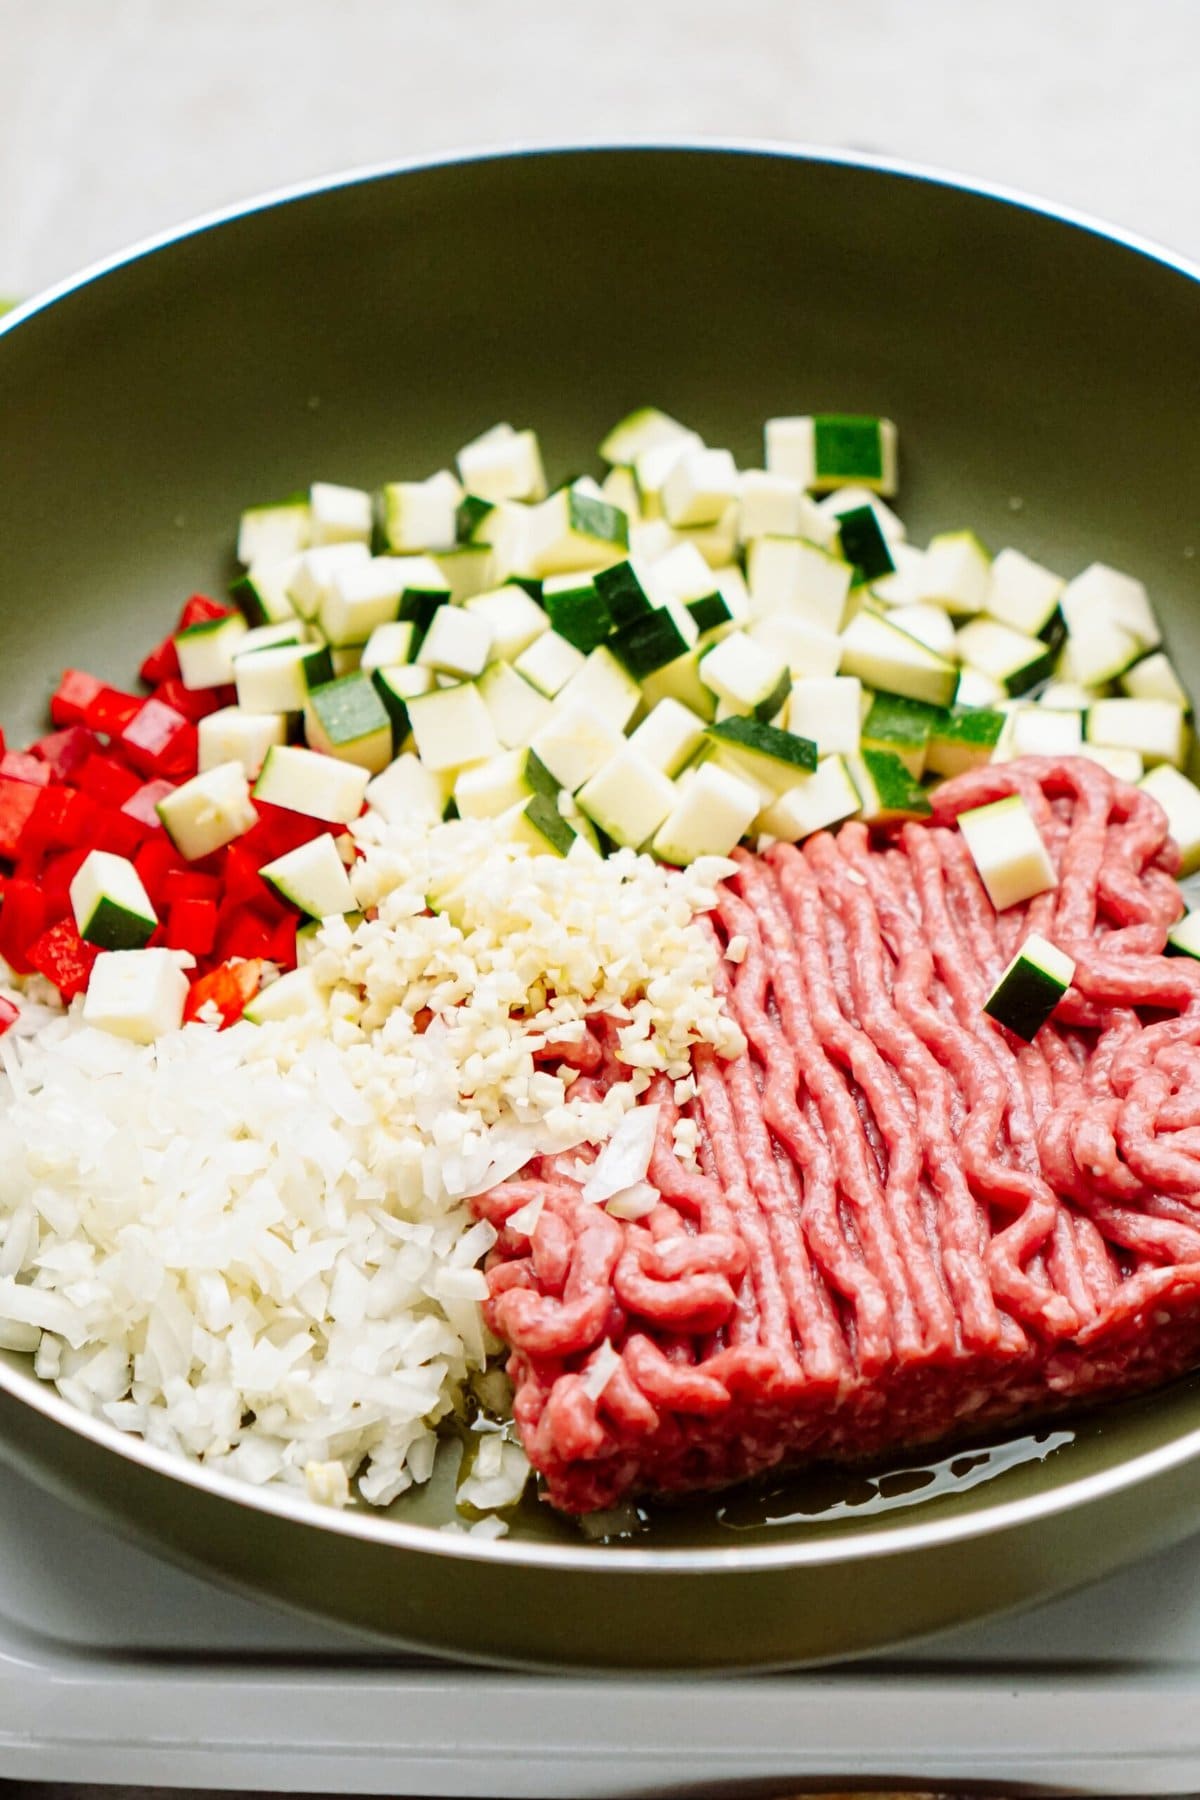 A pan filled with raw ground meat, chopped zucchini, diced red bell pepper, minced garlic, and diced onions.